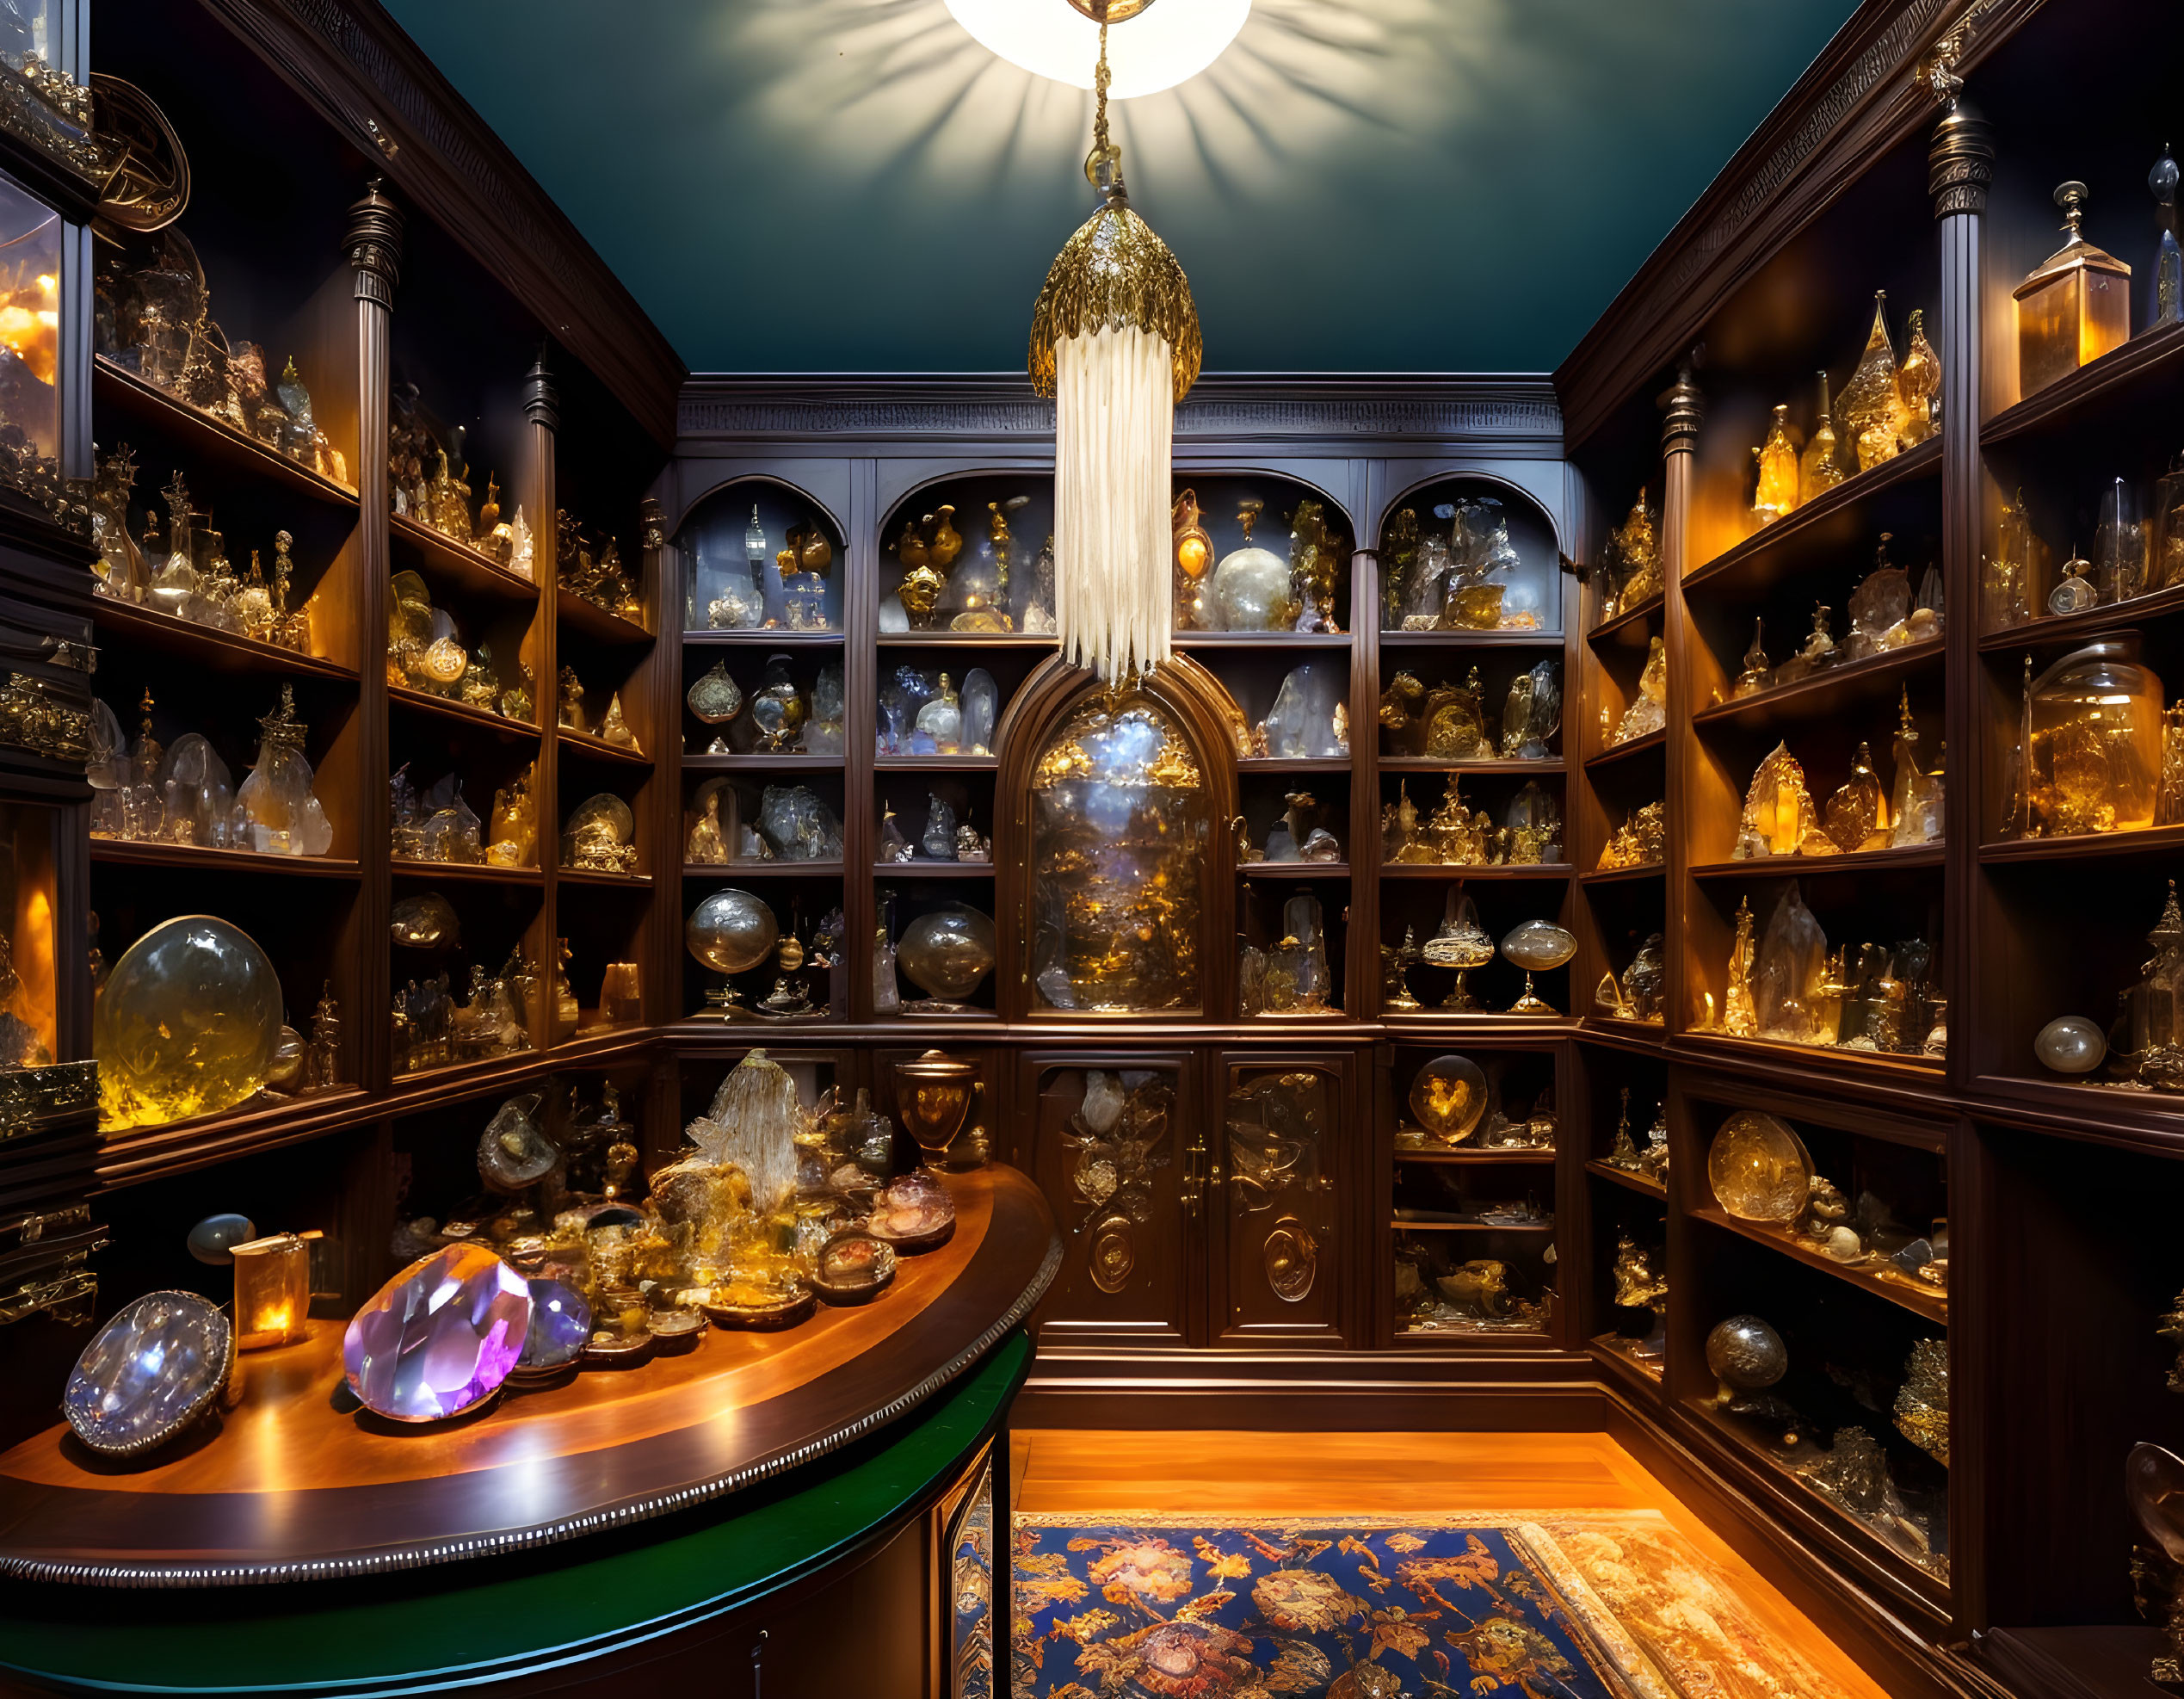 Luxurious Room with Wooden Shelves, Glassware, Artifacts, and Chandelier